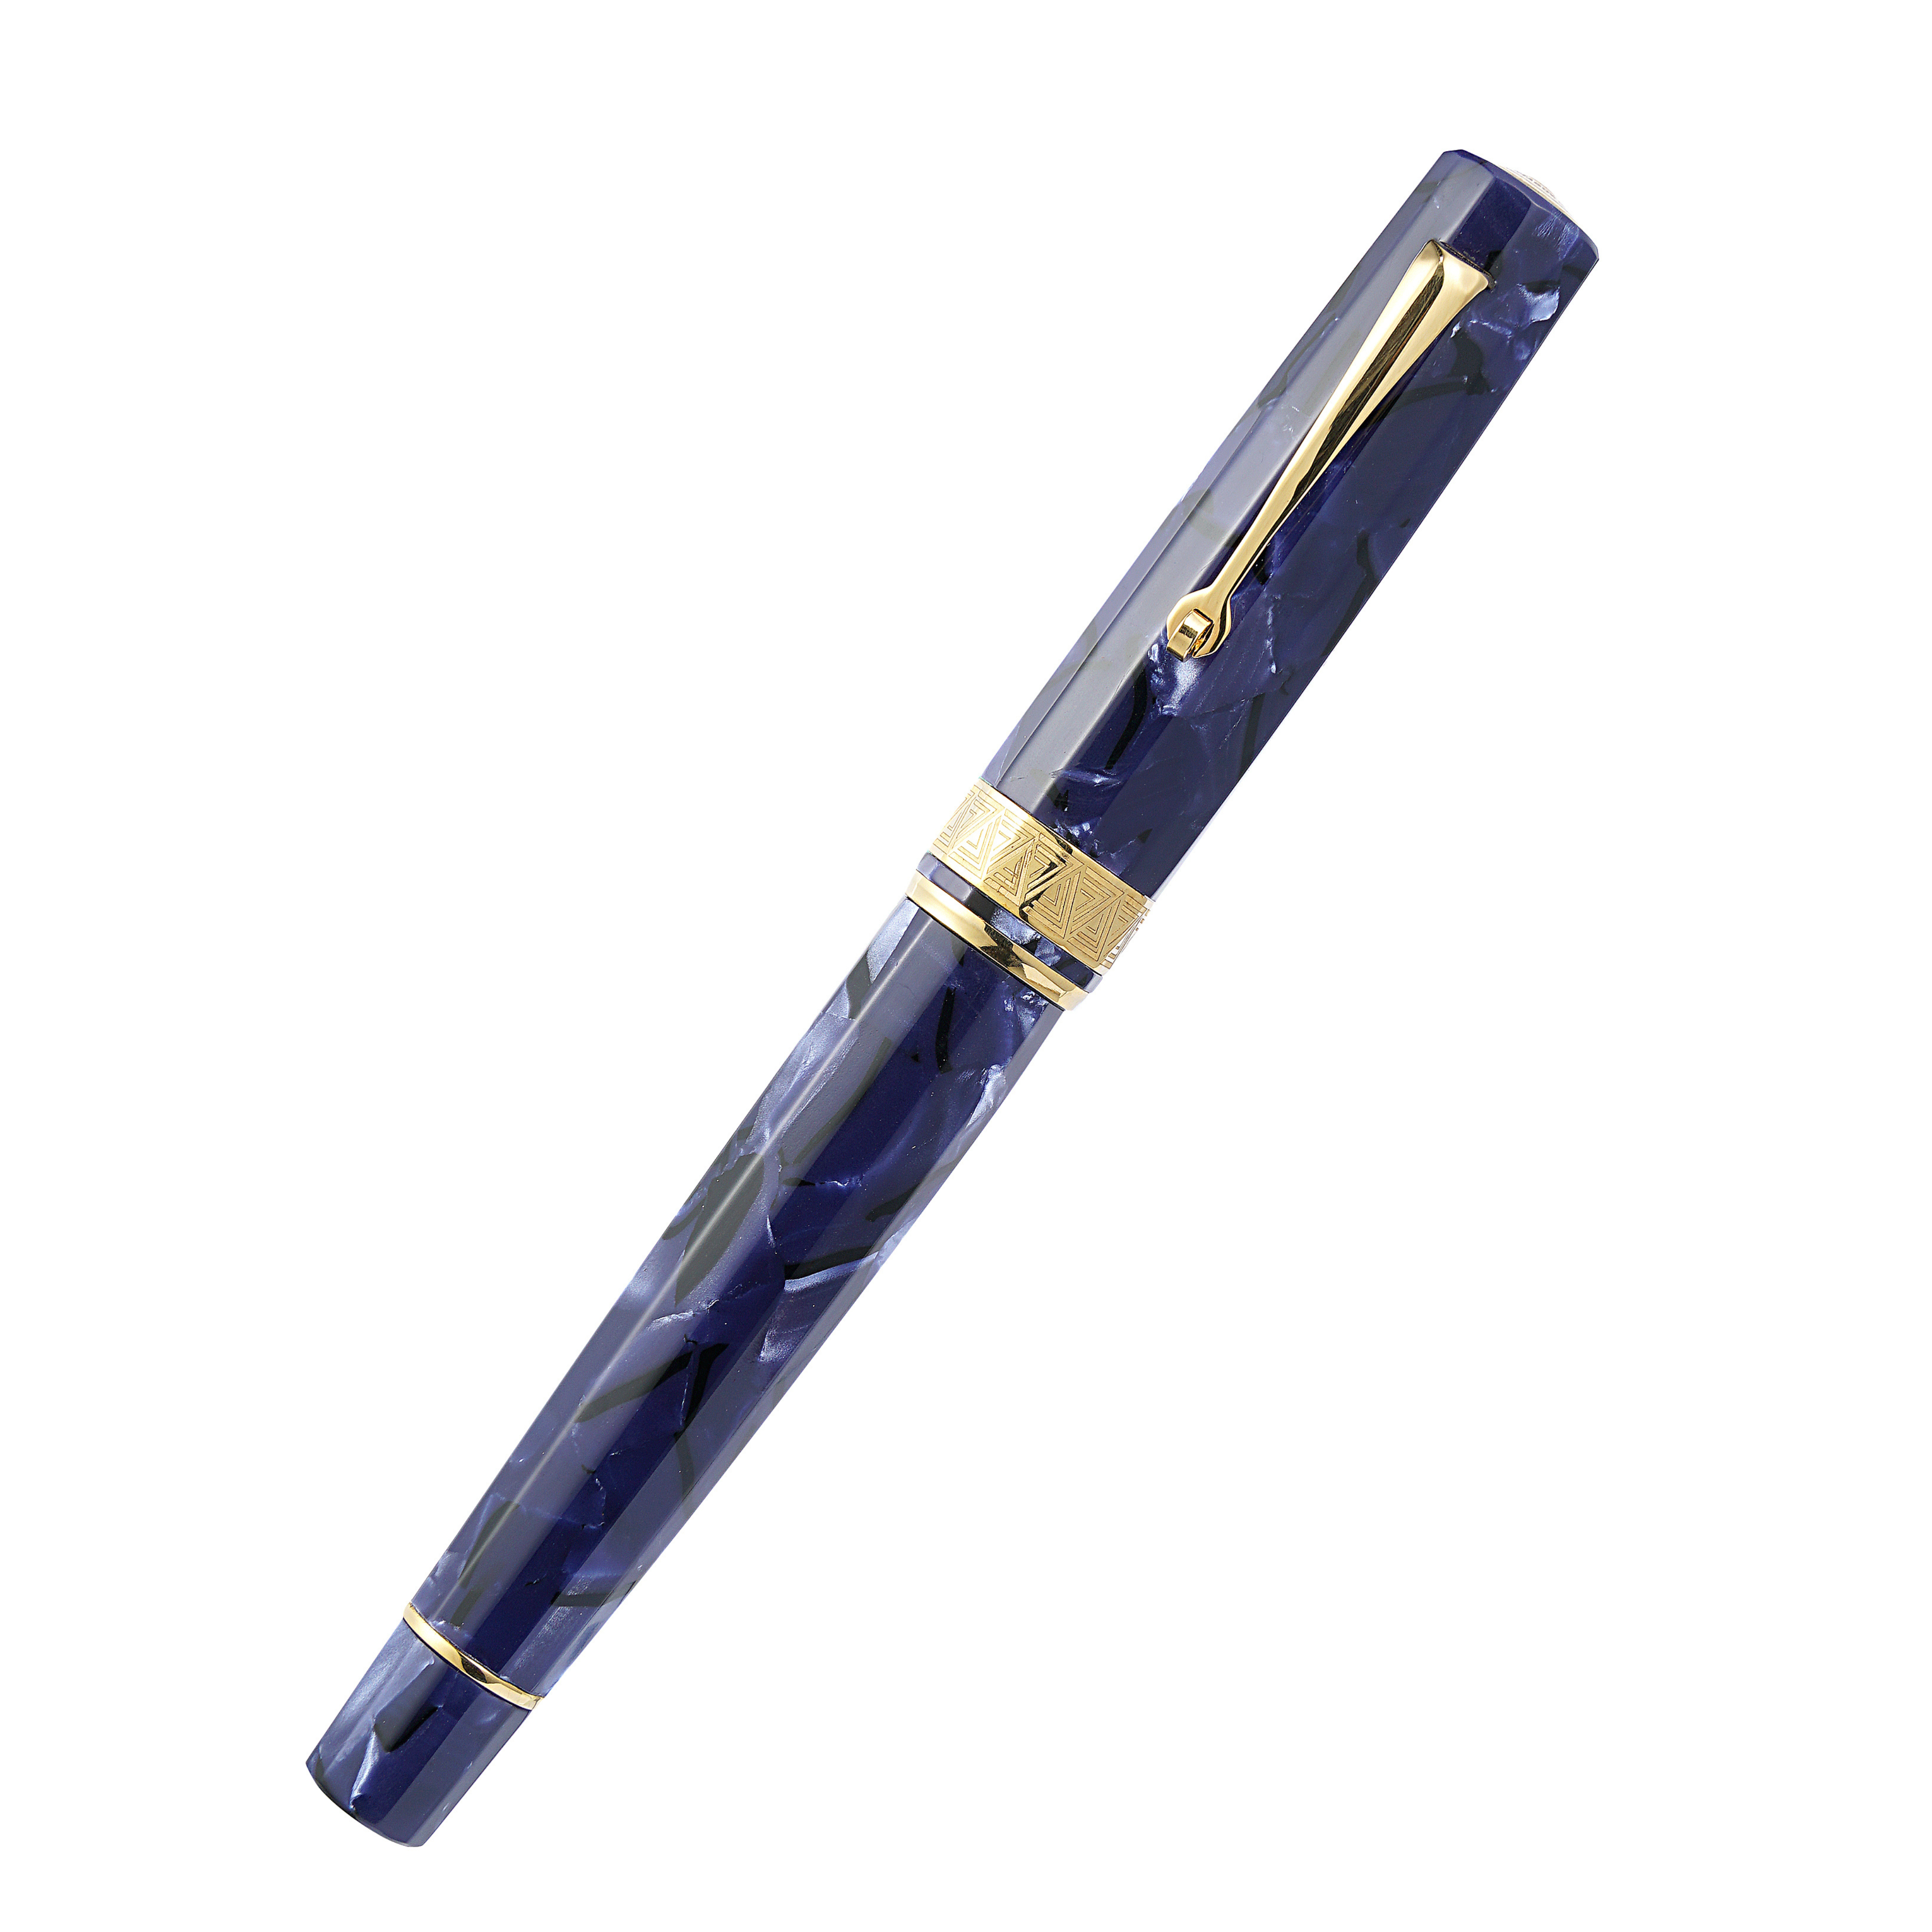 OMAS Paragon Fountain Pen in Blue Royale with Gold Trim